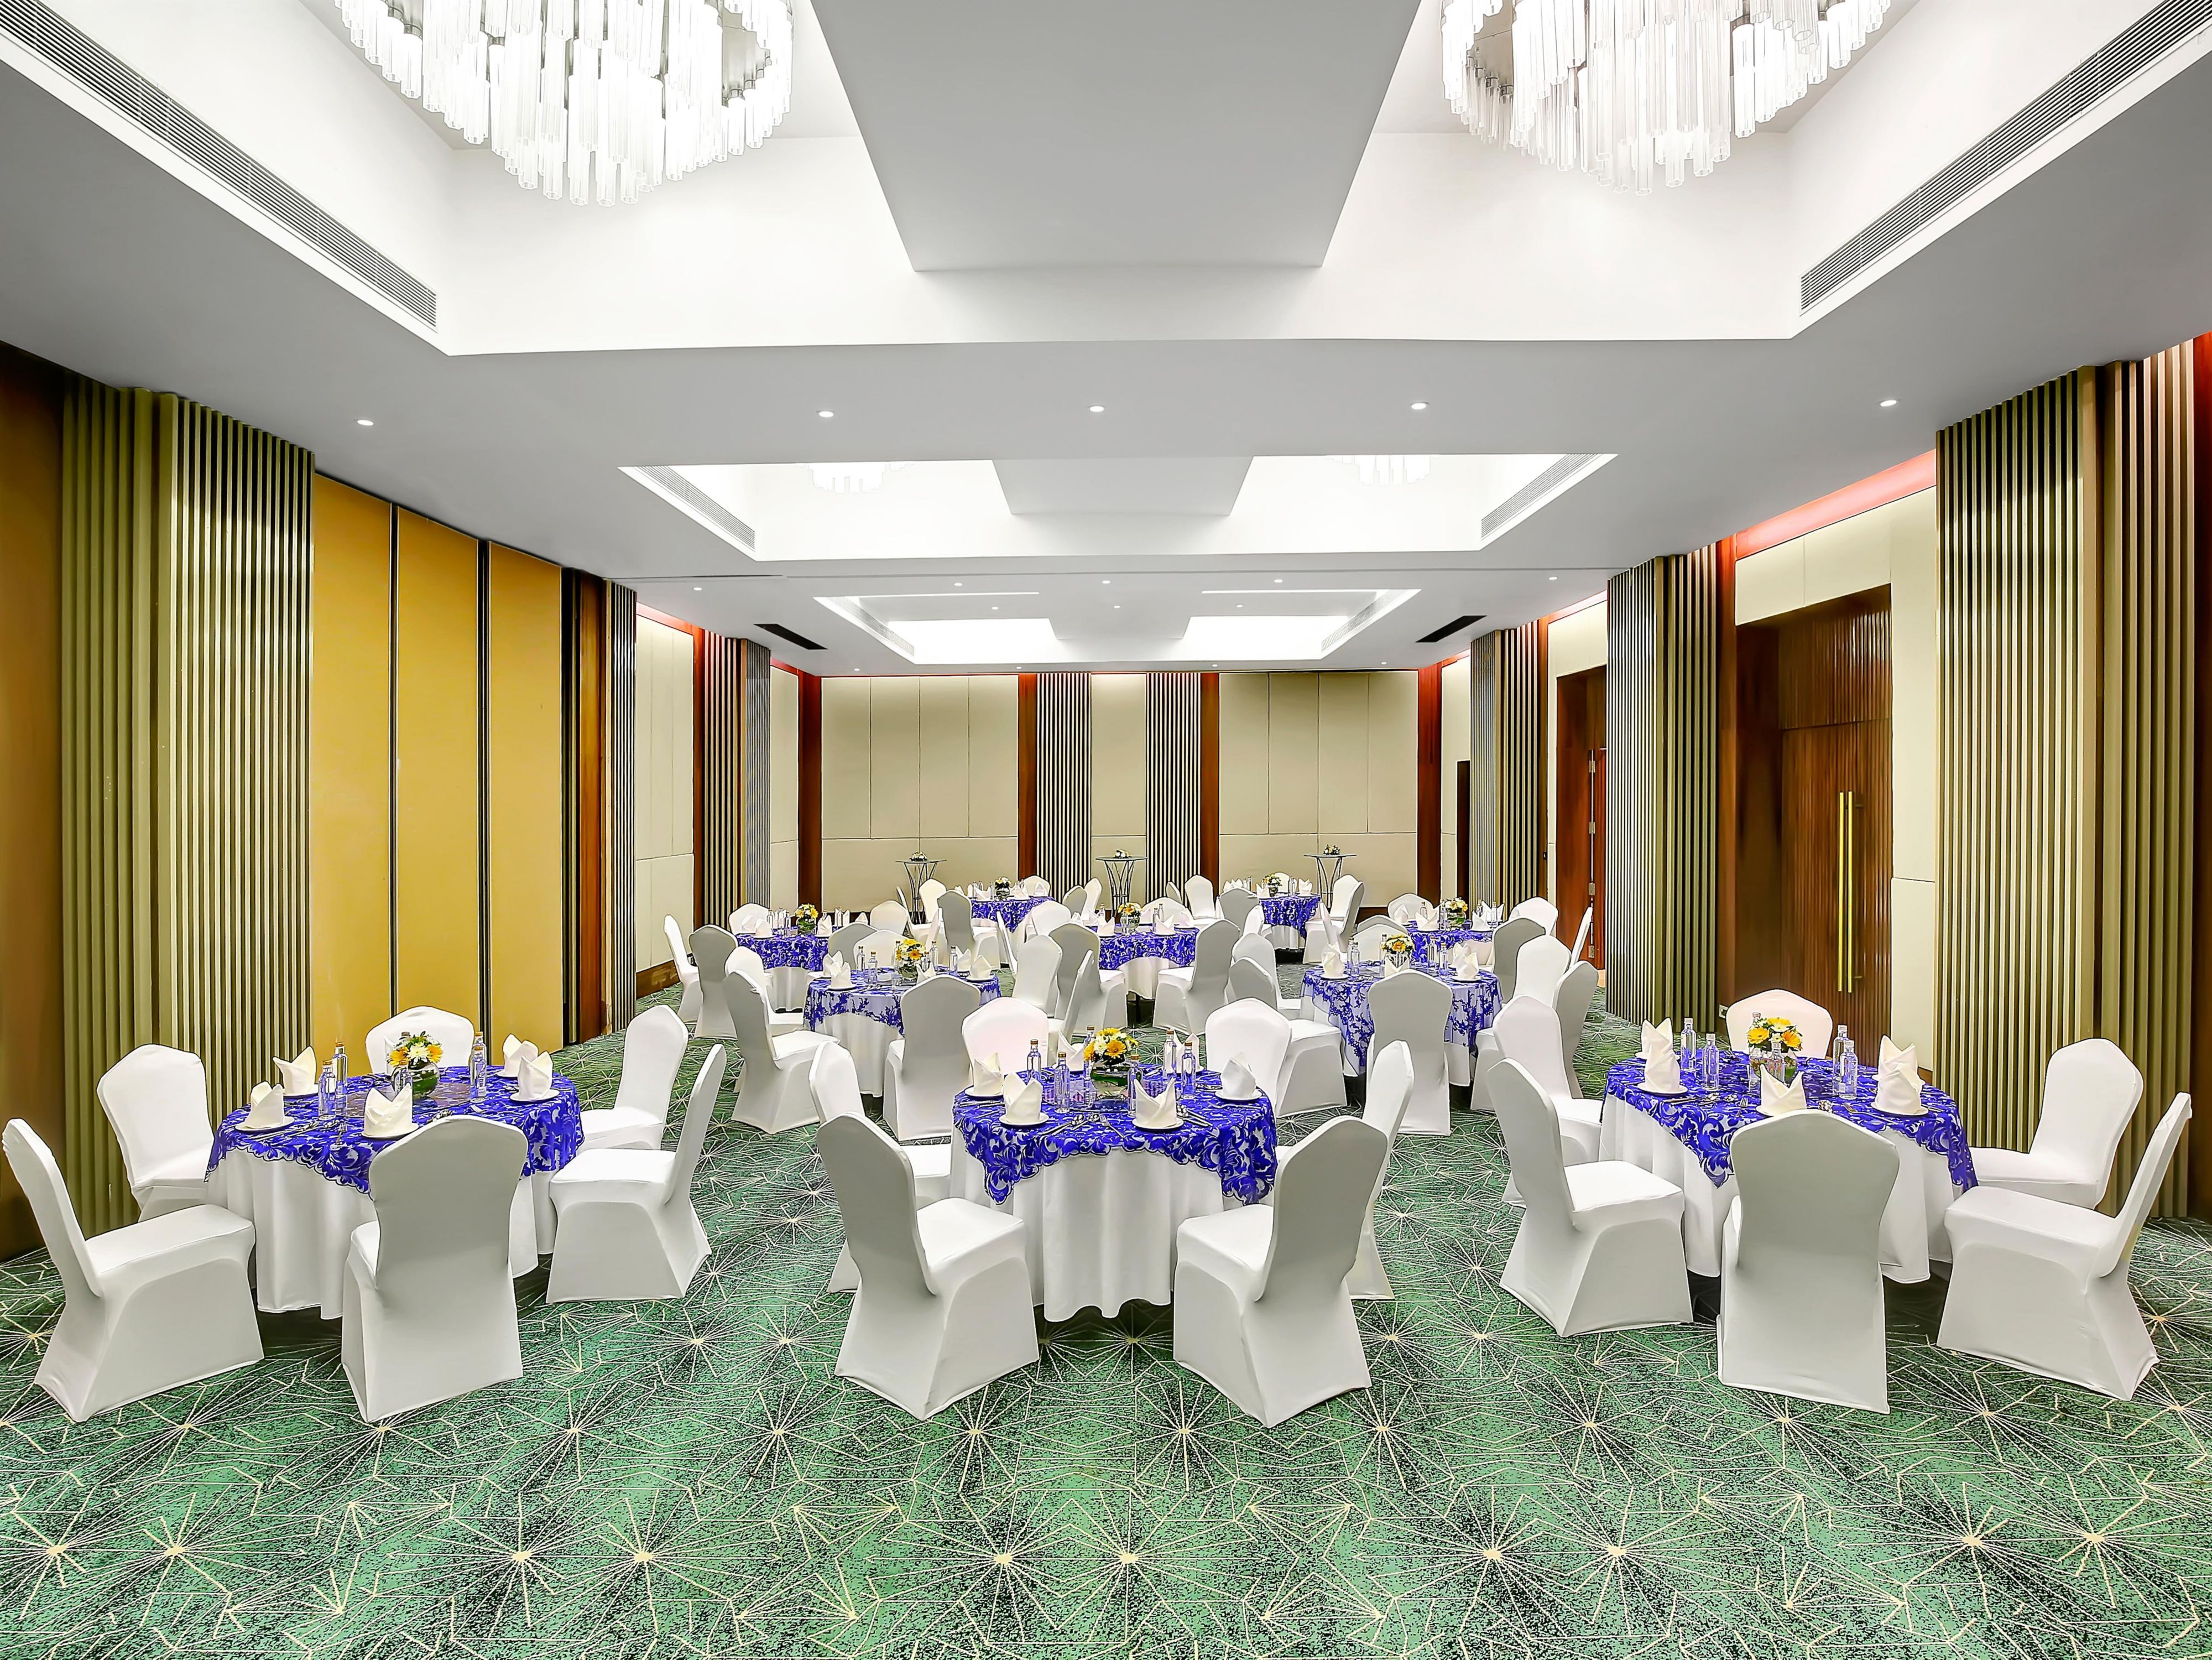 An ideal venue for social events, meetings and conferences spread across 2,000 sq. ft., the banquet space can be partitioned into two separate venues, with a clear ceiling height of 12.9 sq. ft. and 165 sq. ft. of pre function area.